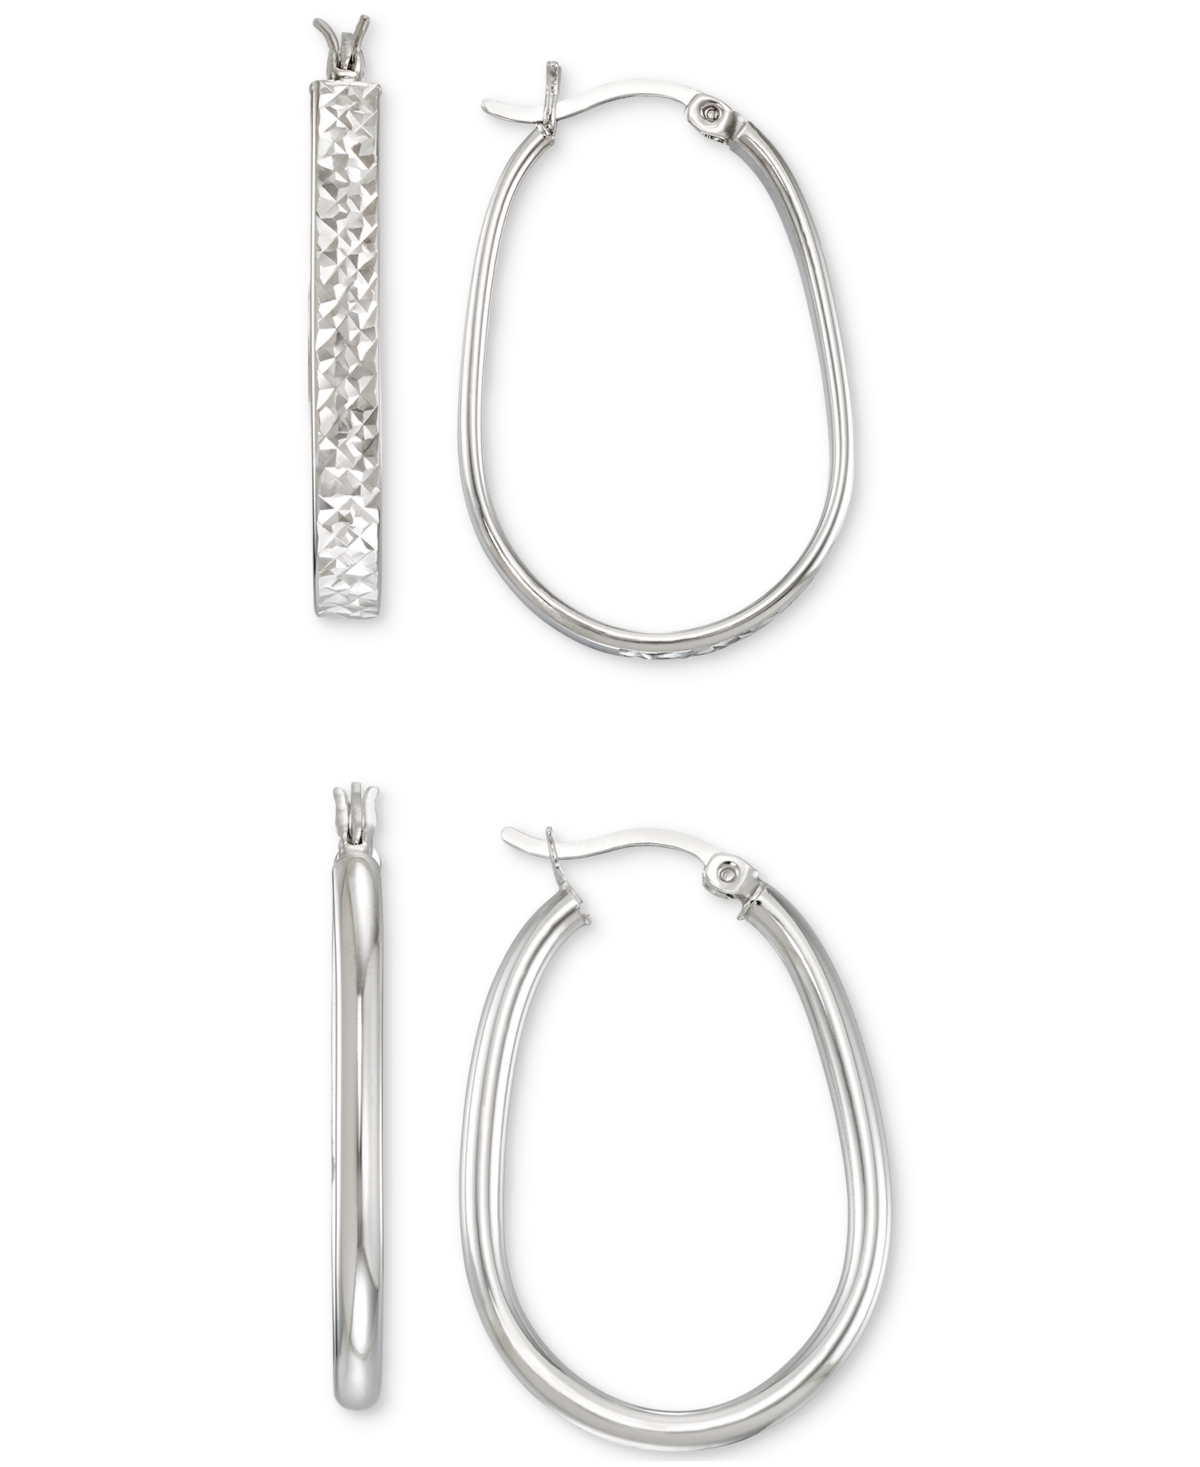 Macy's 2-pc. Brushed And Polished Oval Hoop Earrings Set In 14k Gold Over Sterling Silver And Sterling Silv